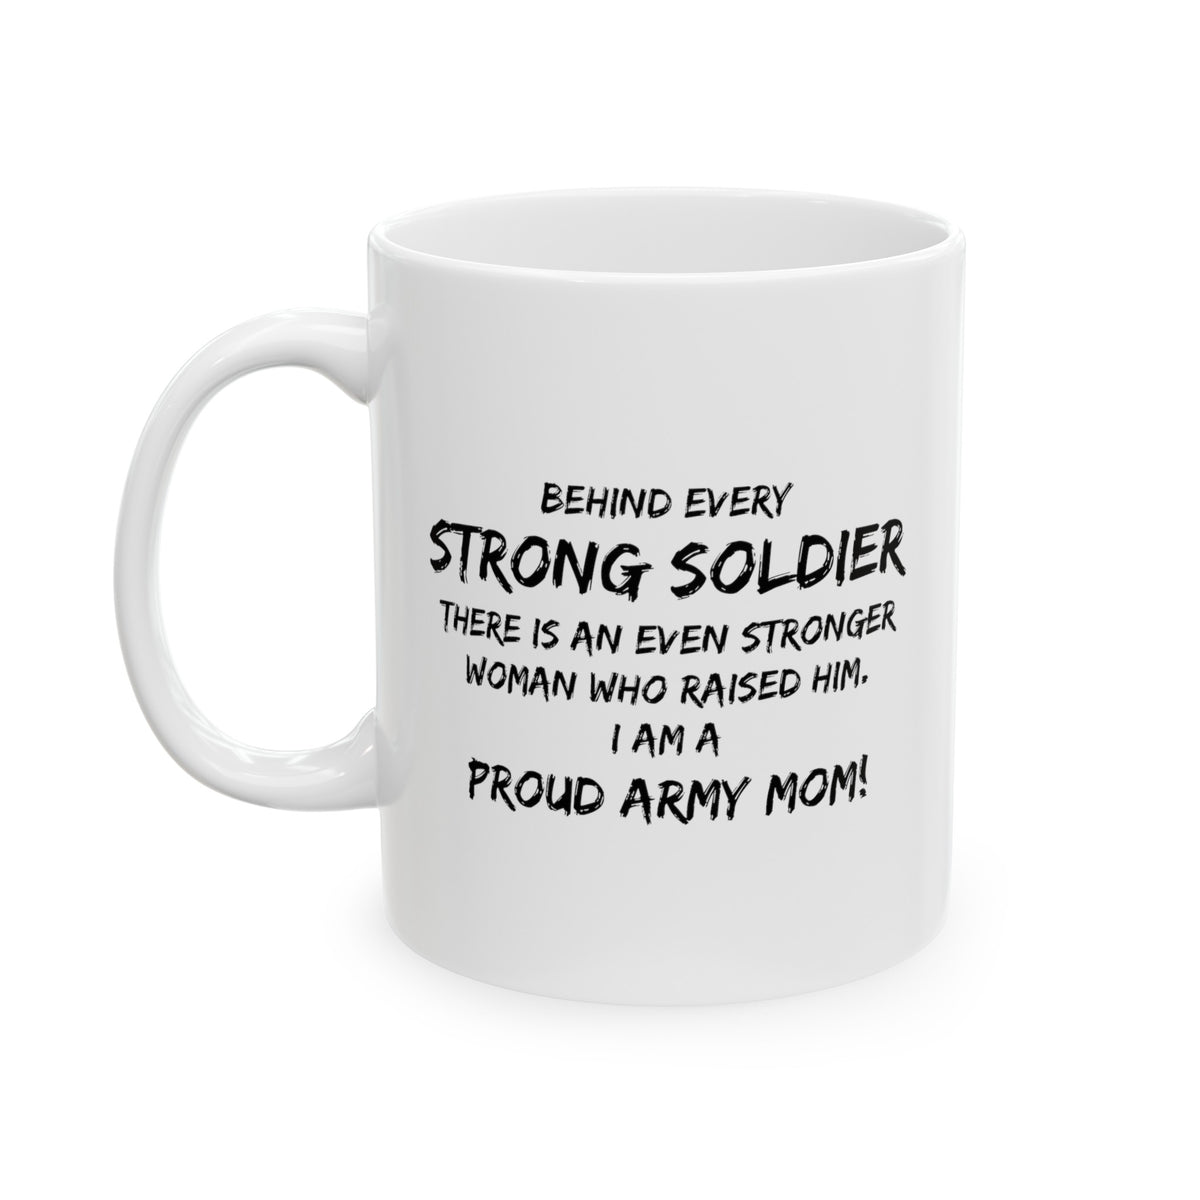 Behind Every Strong Soldier There Is An Even Stronger Woman Who Raised Him. I Am A Proud Army Mom! Mug - Funny Army Mom Ceramic Coffee Cup